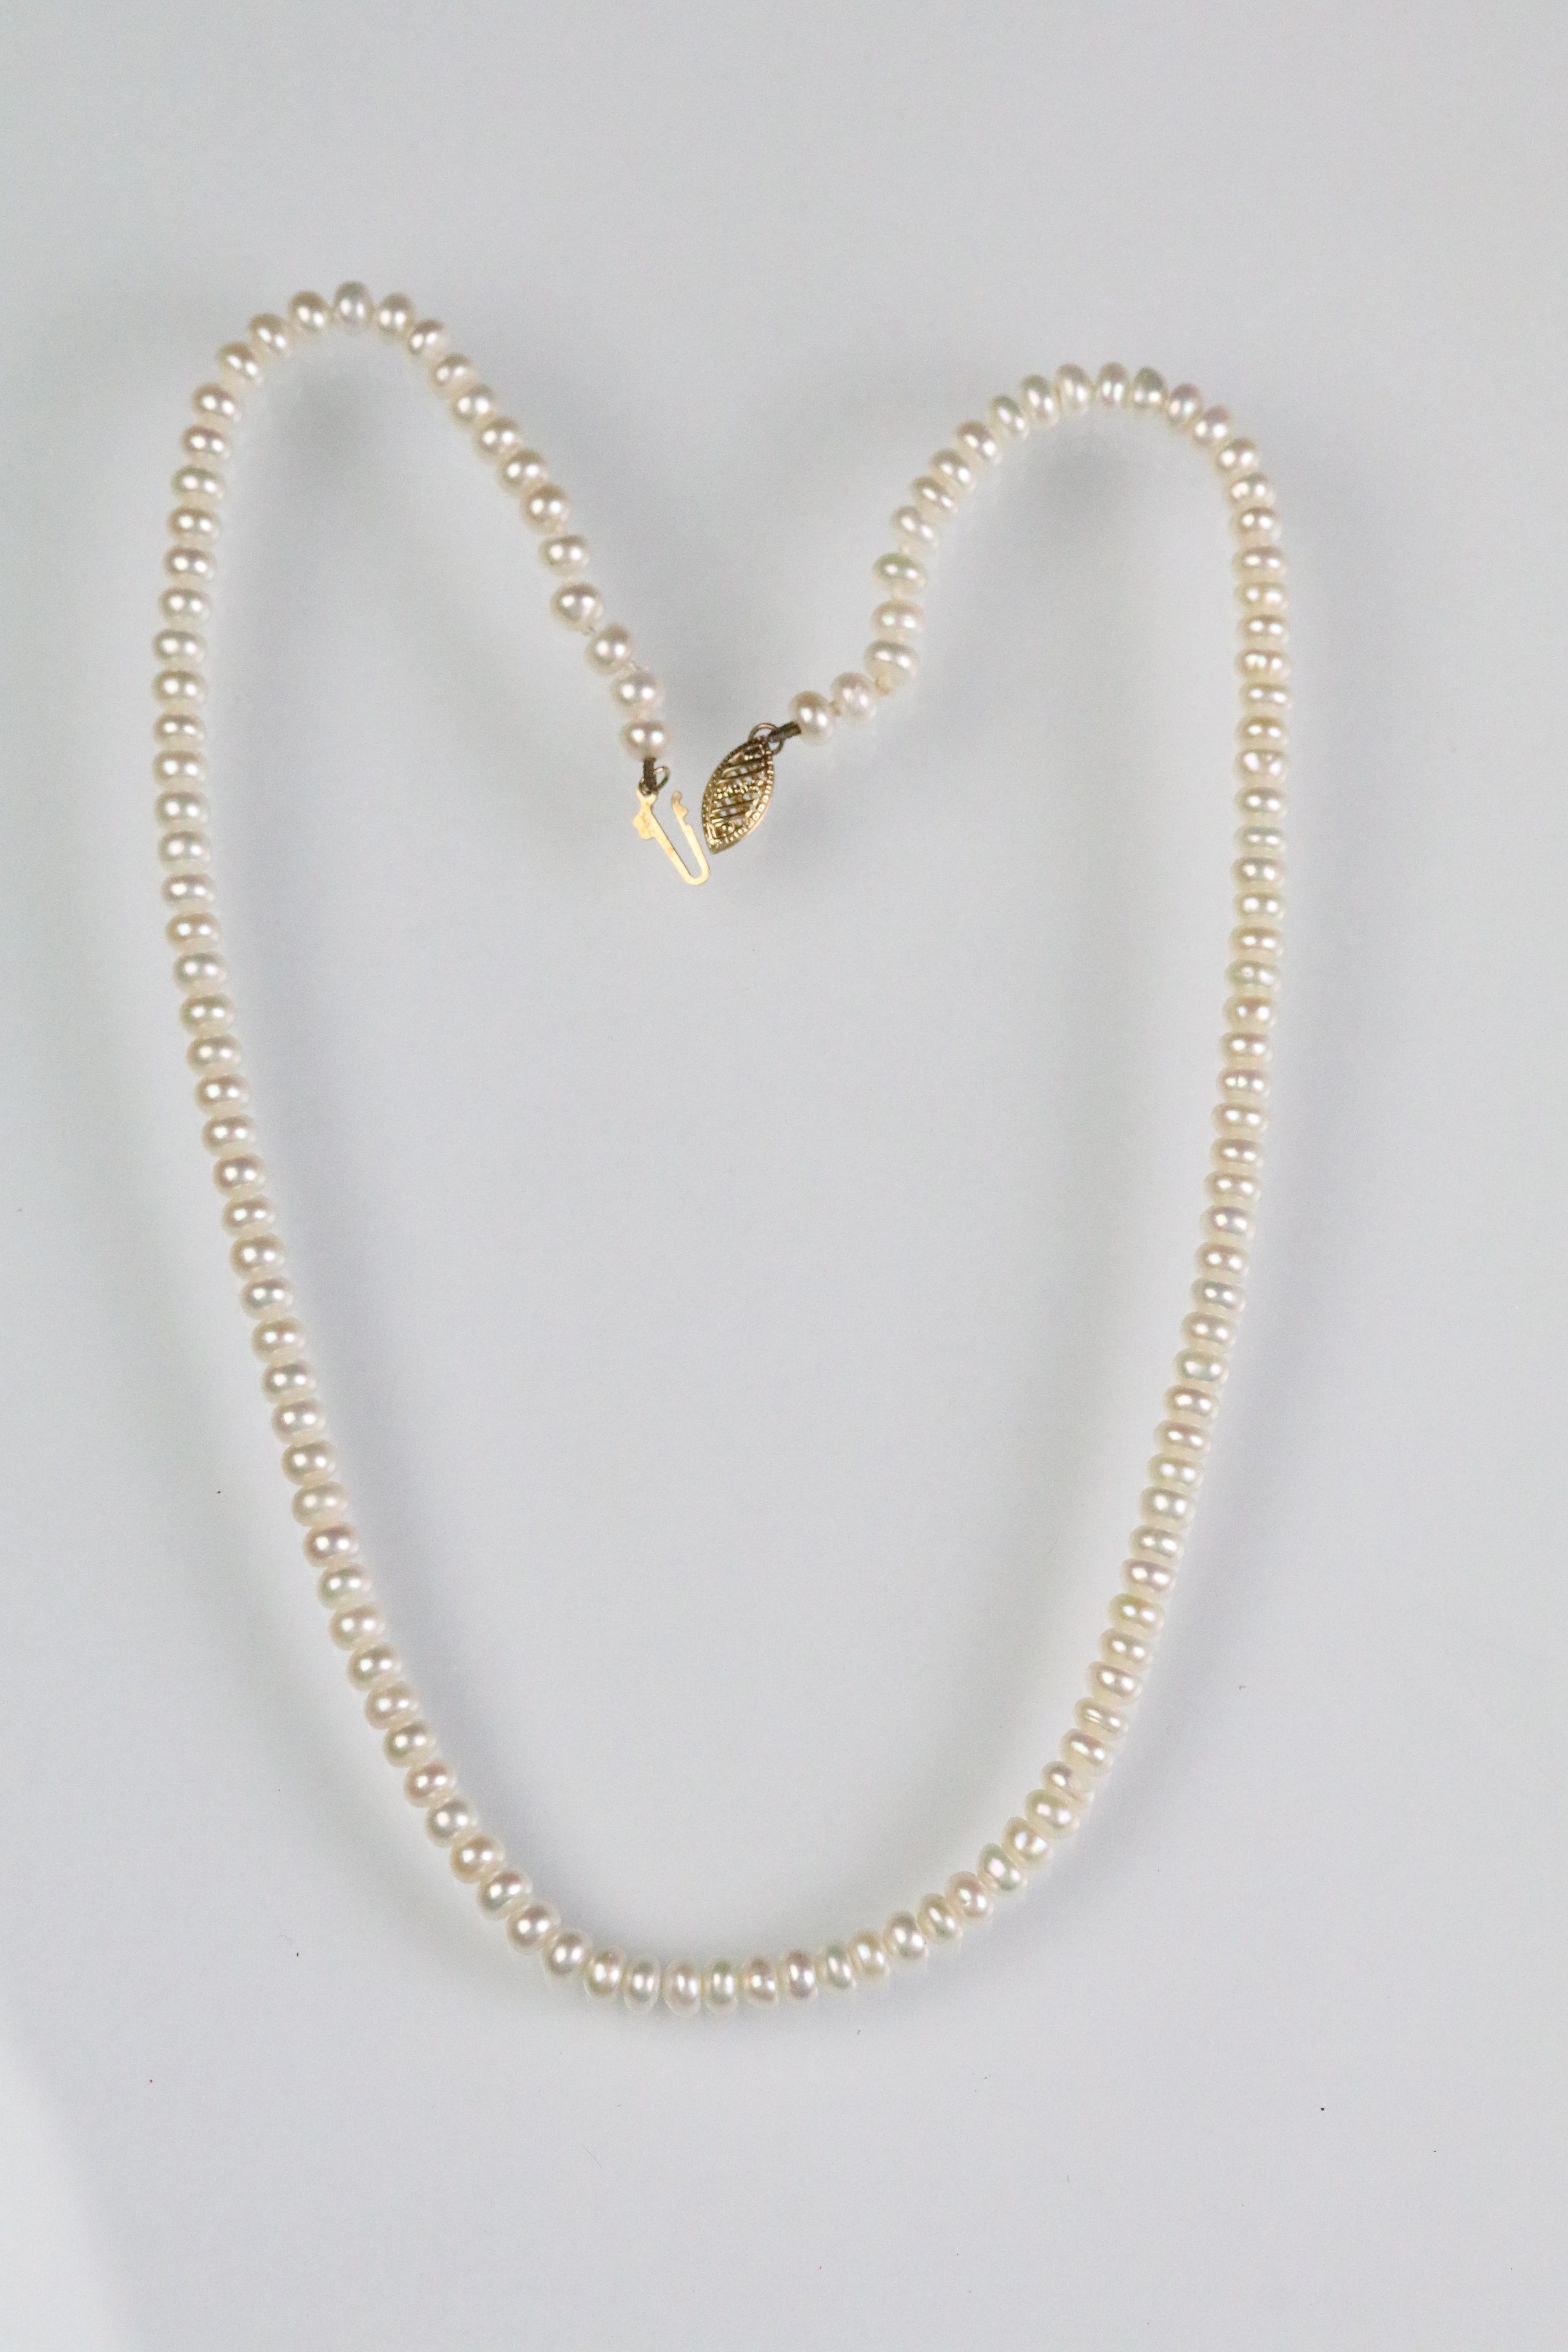 Cultured pearl necklace with a 14ct gold navette shaped clasp. Clasp marked 585. Measures 18 inches. - Image 3 of 4